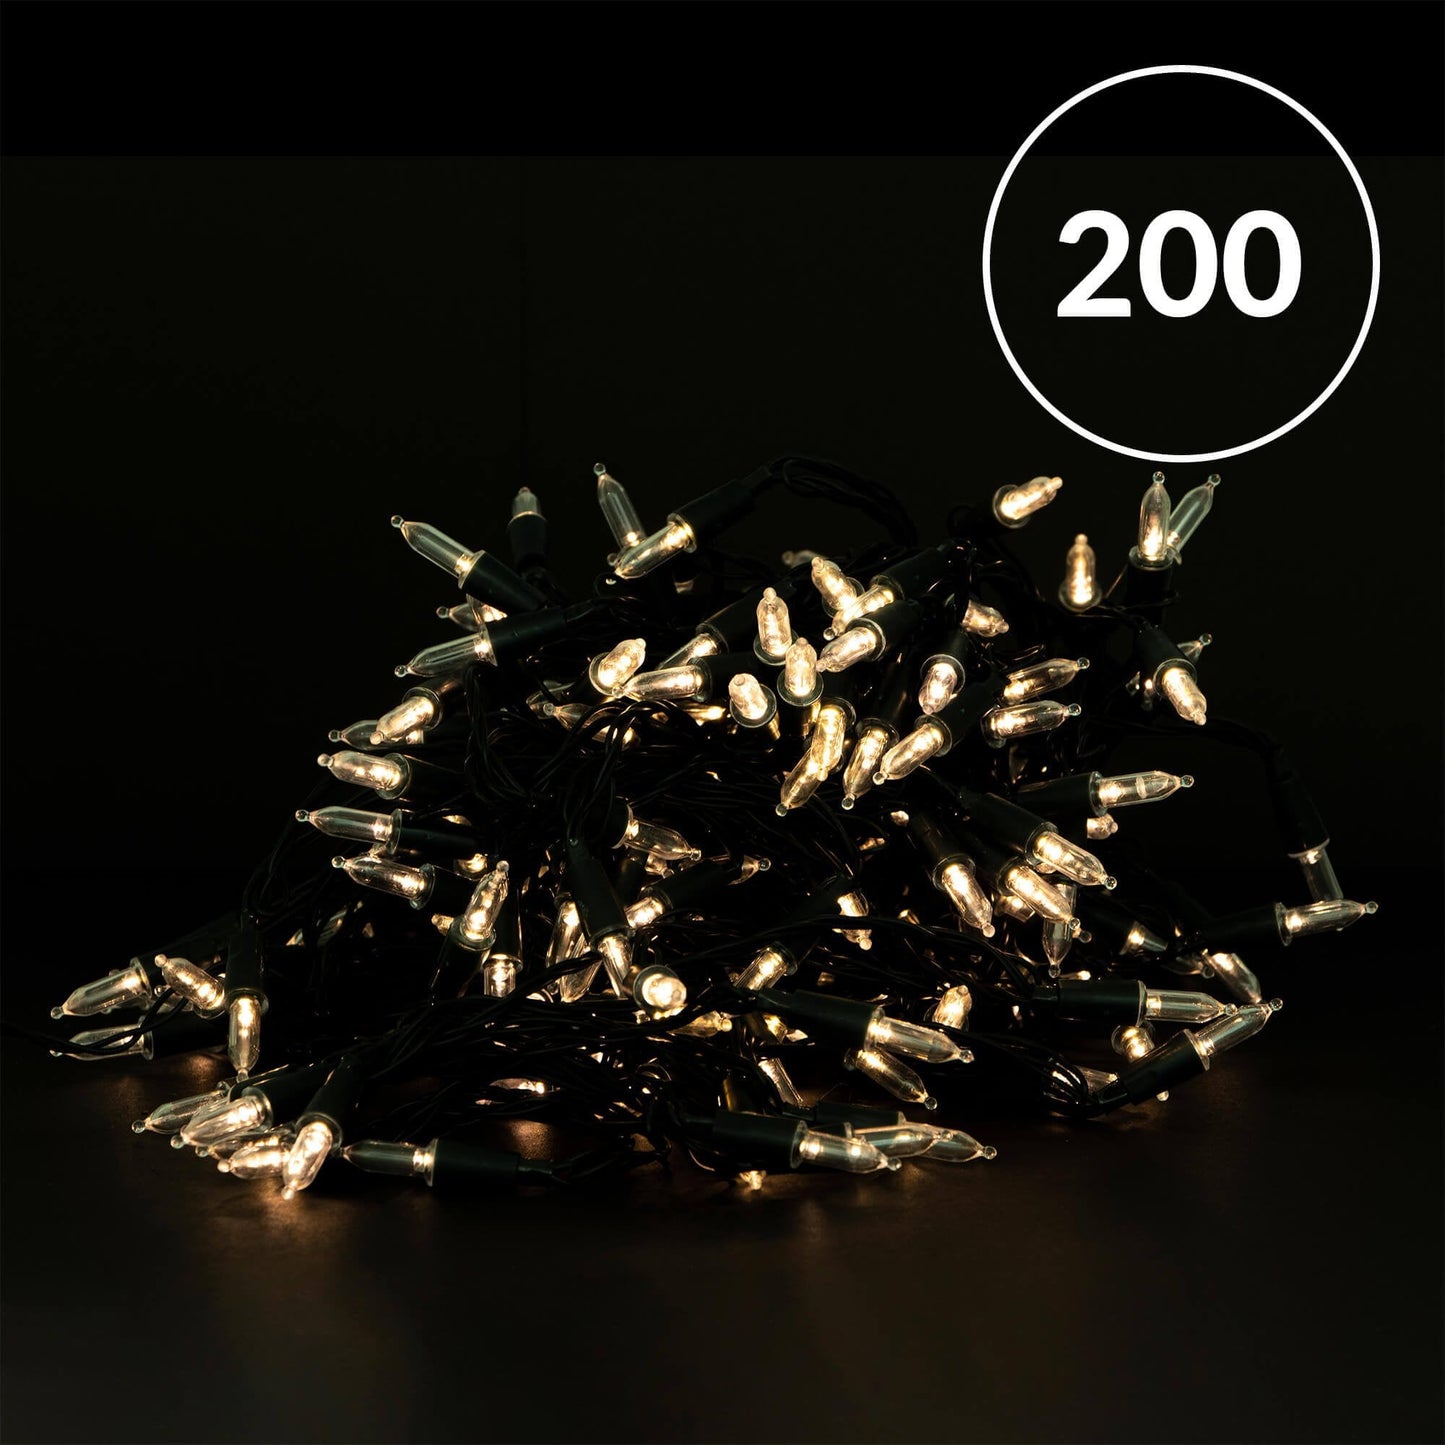 Christmas Sparkle Battery Operated Fairy Lights with 200 Warm White LEDS